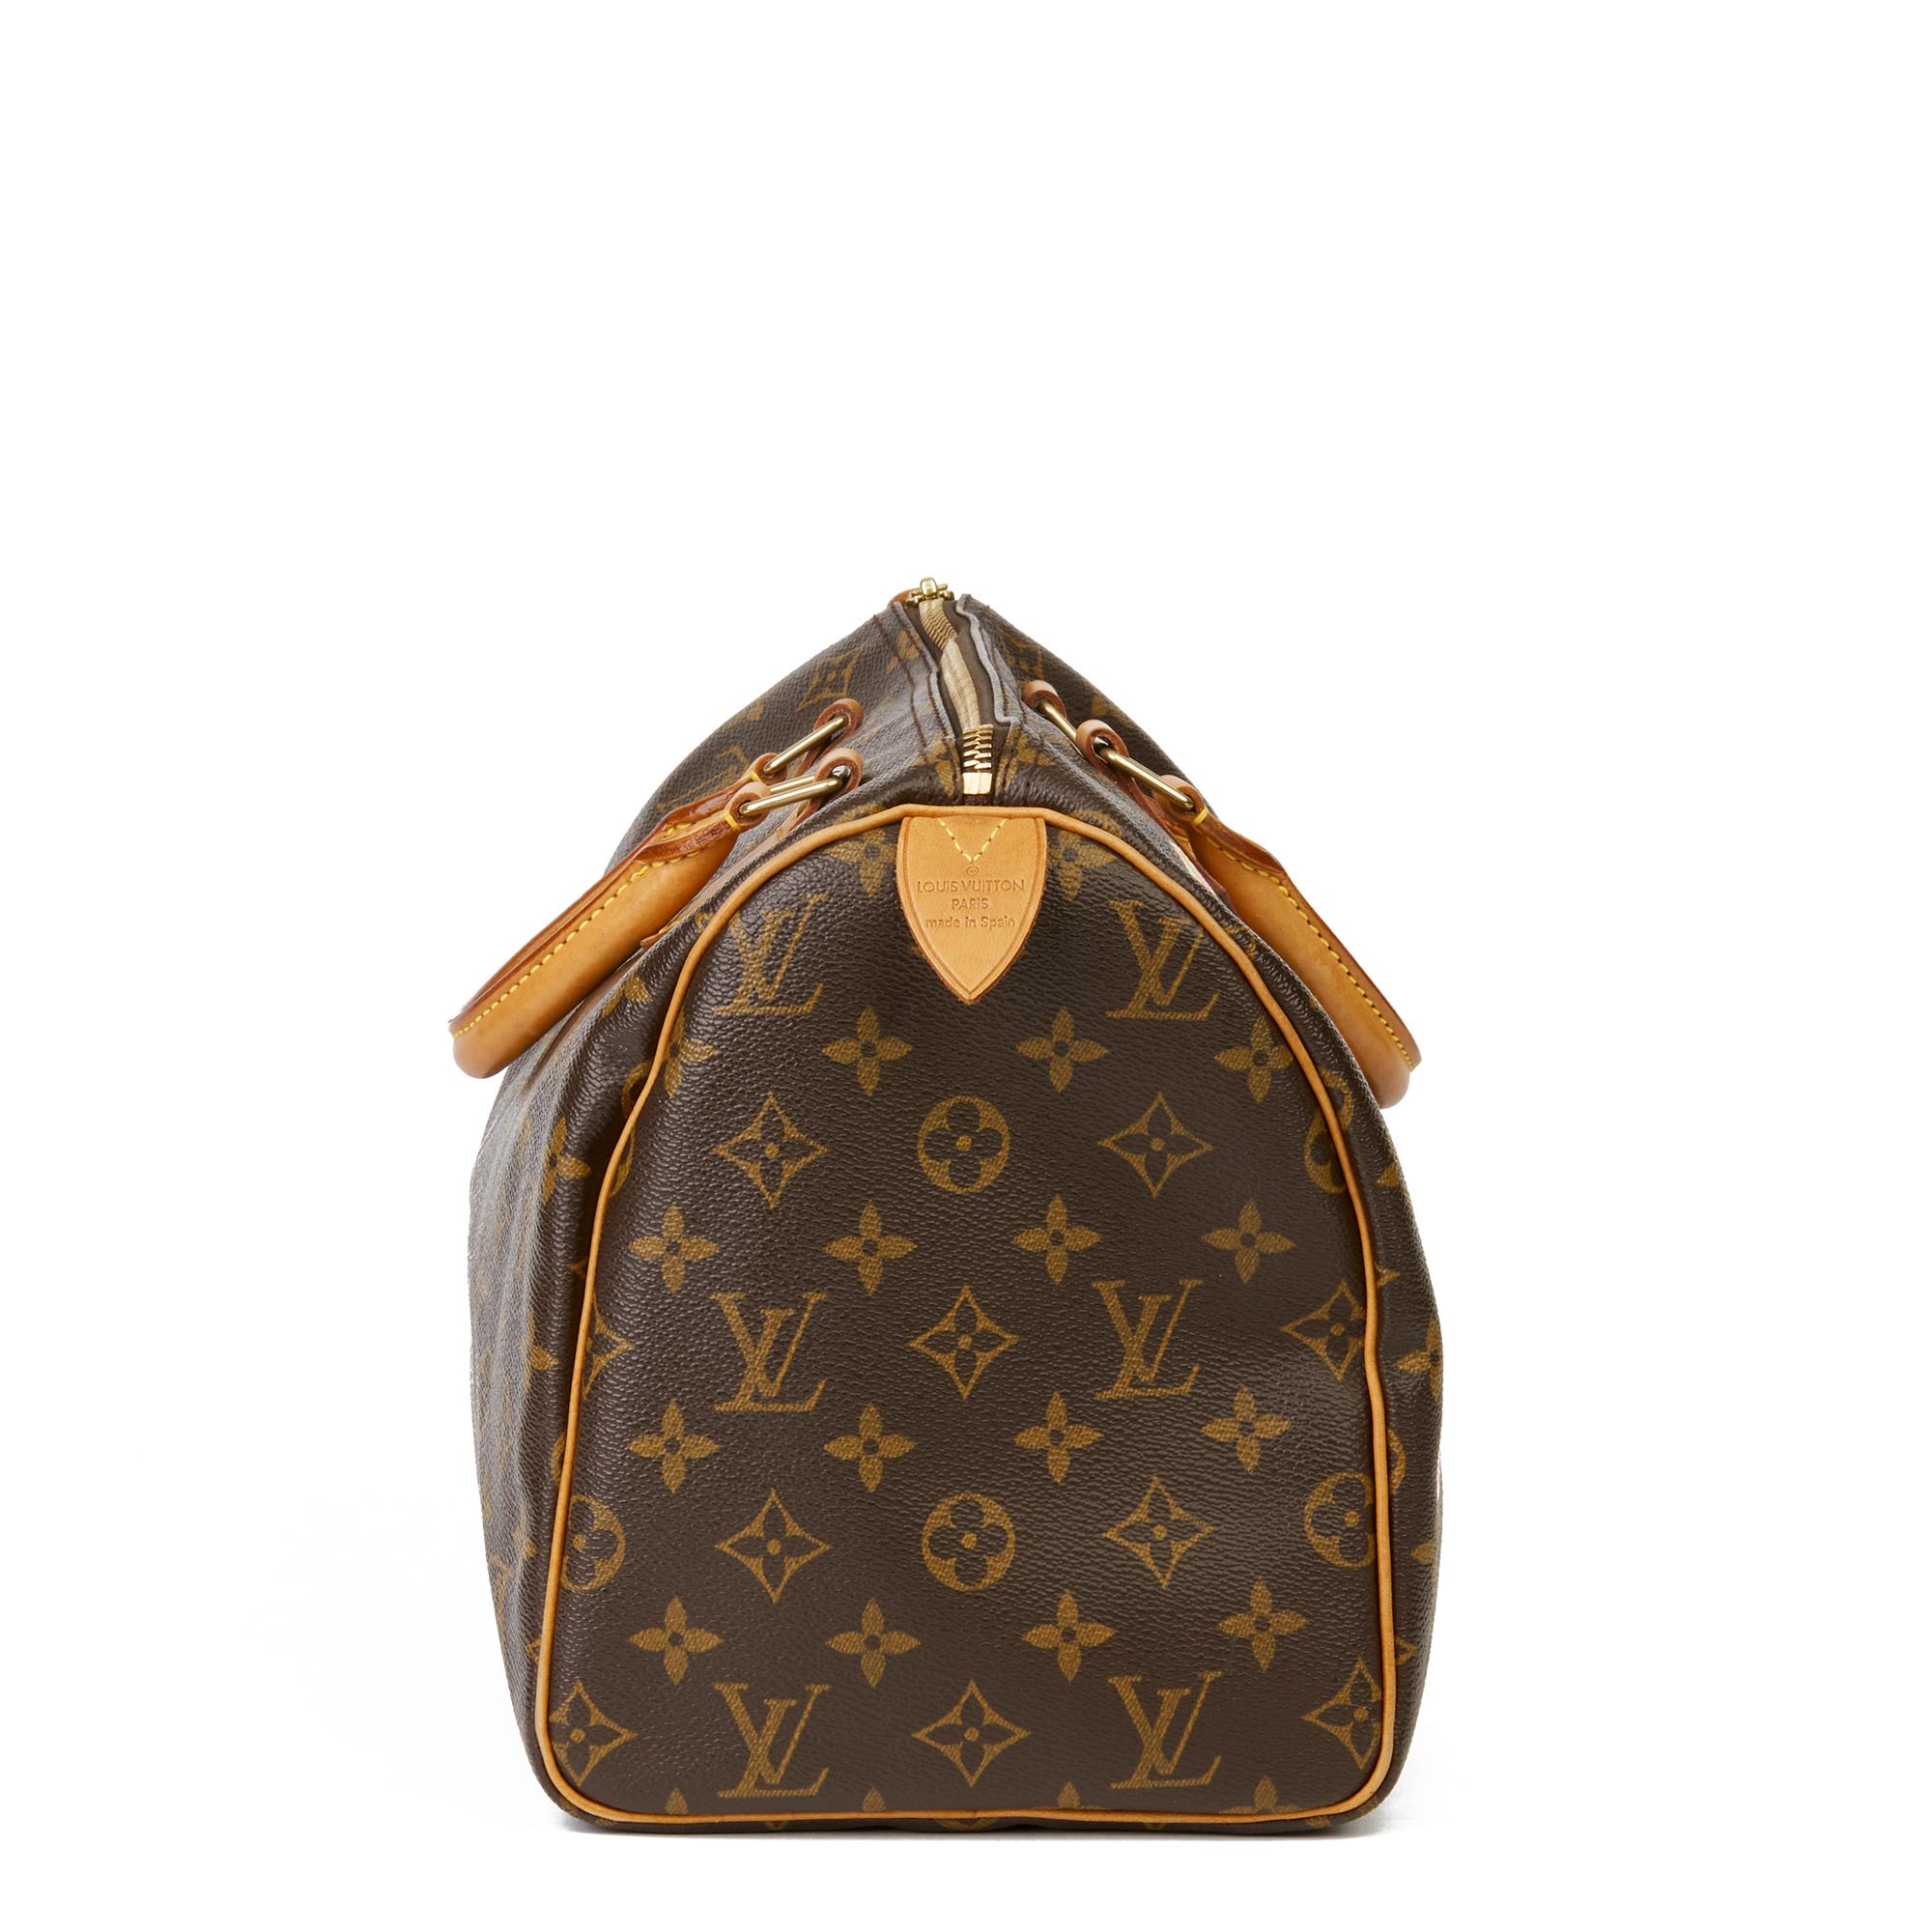 LOUIS VUITTON
X Year Zero London Hand-painted  ‘Love is Love’ Brown Monogram Coated Canvas Speedy 30

Serial Number: LB1022
Age (Circa): 2002
Authenticity Details: Date Stamp (Made in Spain)
Gender: Ladies
Type: Tote 

Colour: Brown 
Hardware: